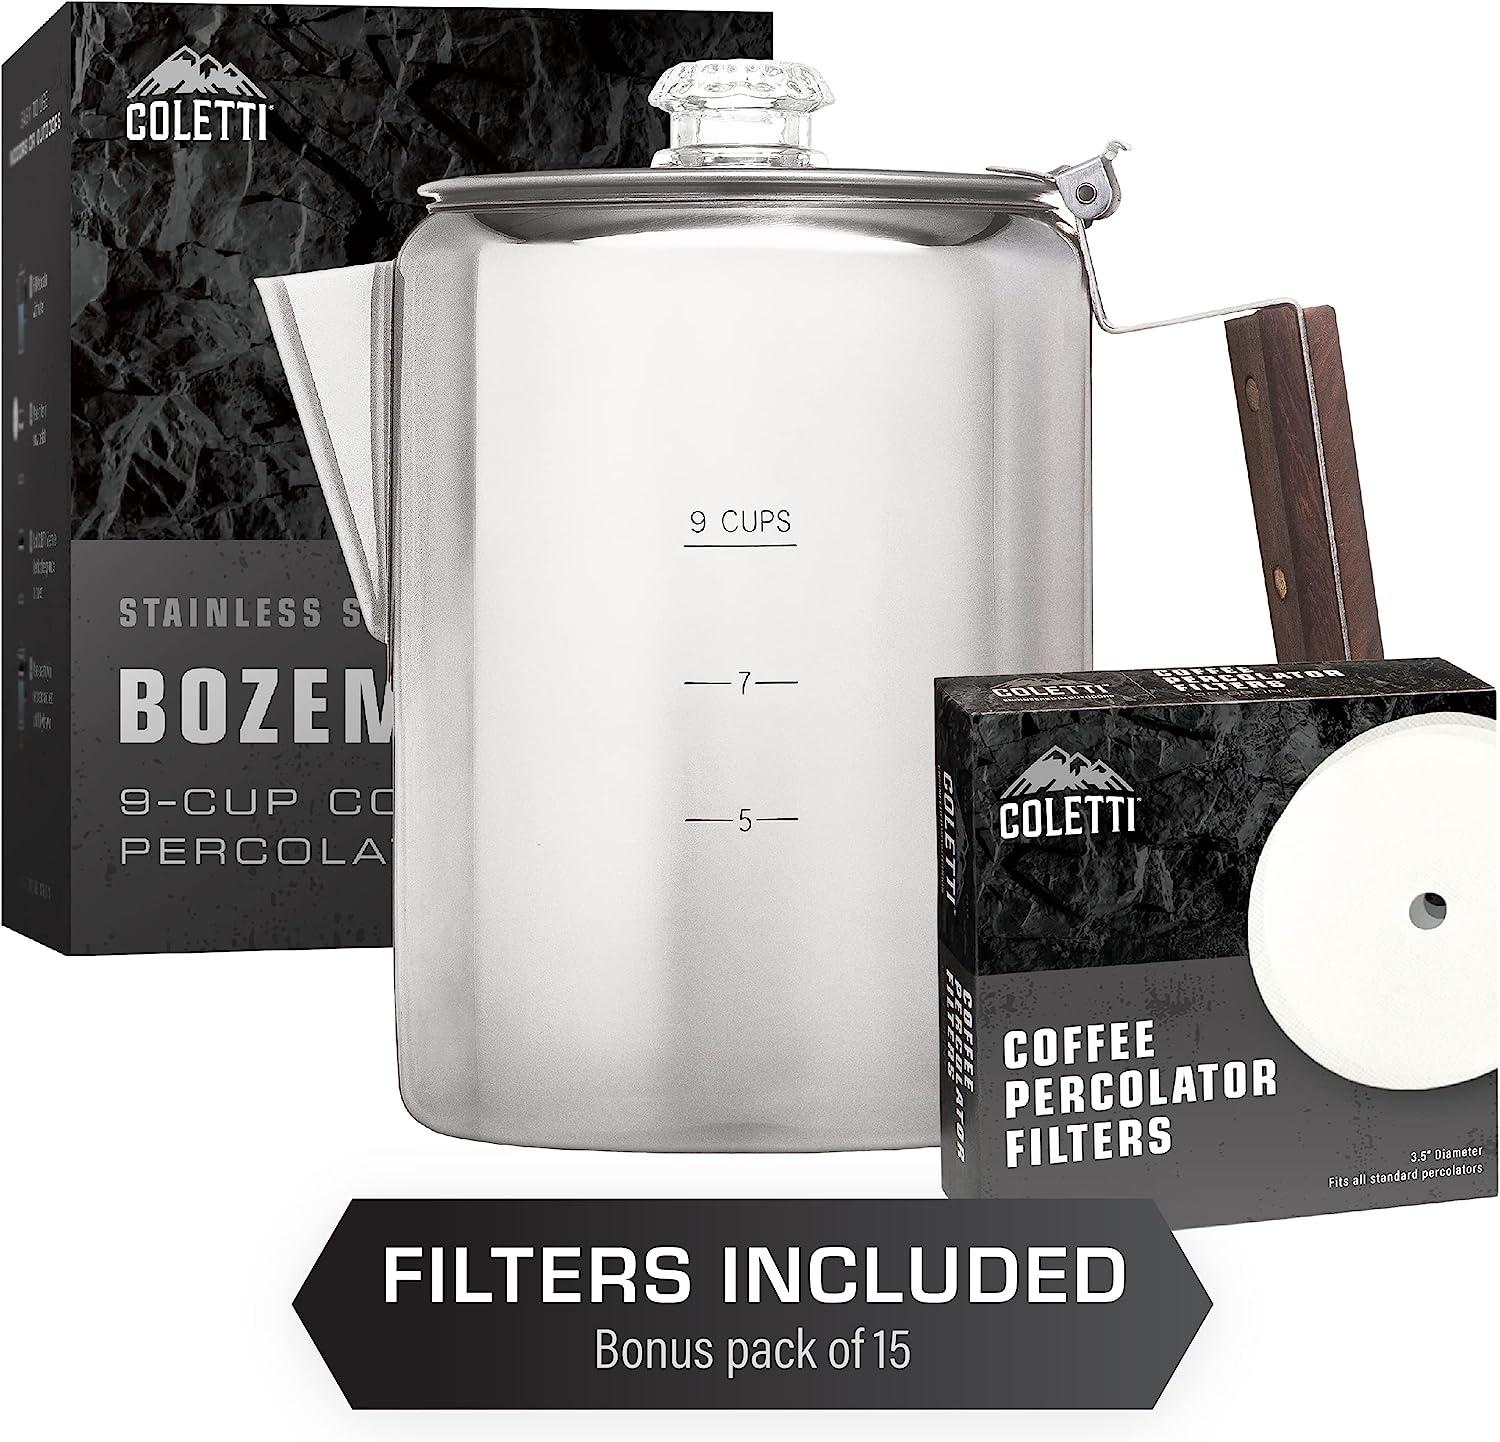 7 Best Camping Percolator Models for Perfect Camp Coffee